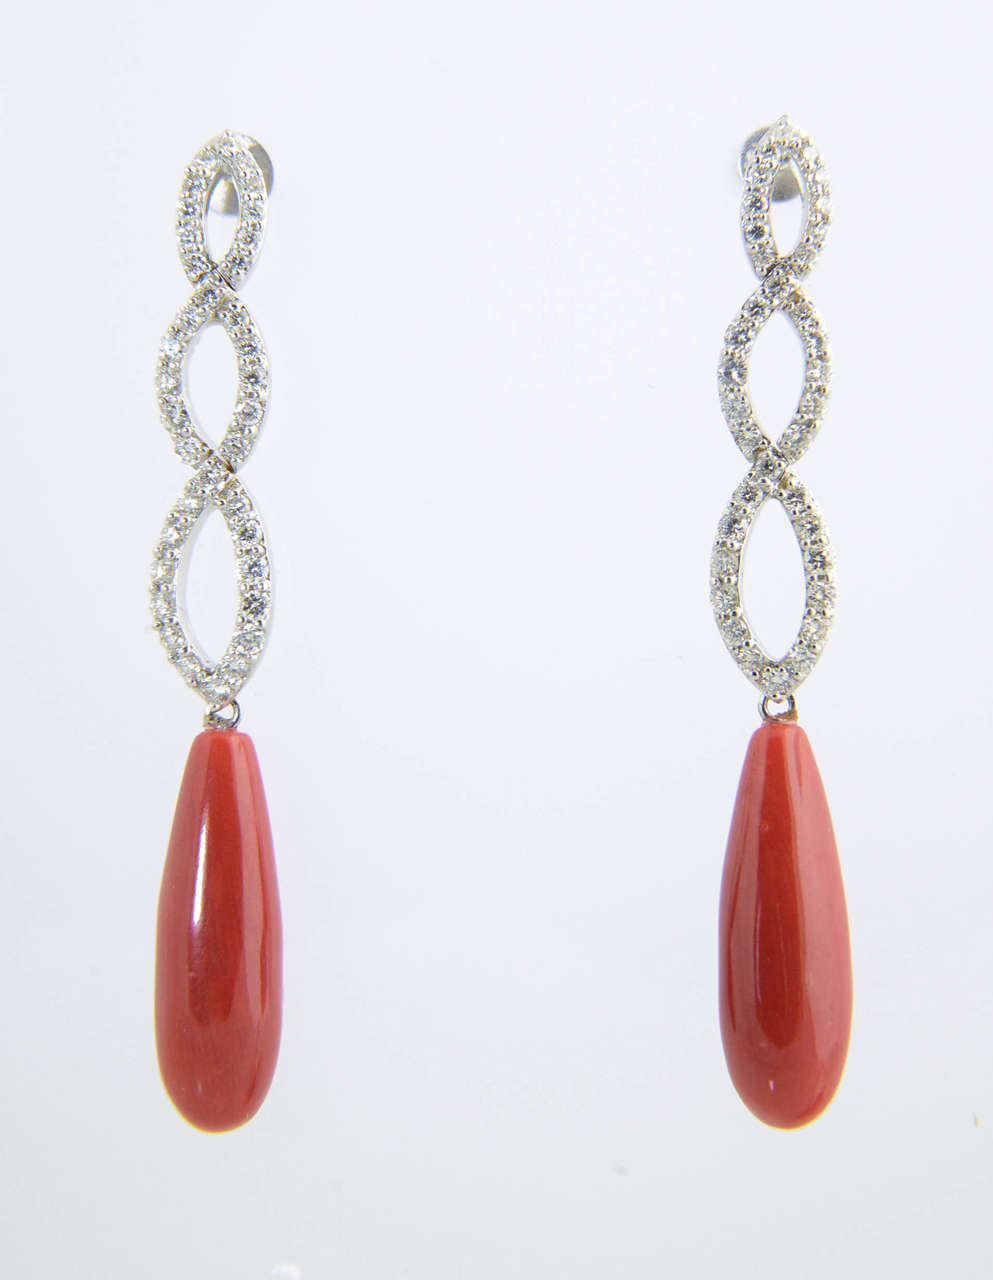 Signed 18k Fred & Co., 2 carat diamond twist that terminates in a coral drop set in 18k white gold.

Post backs